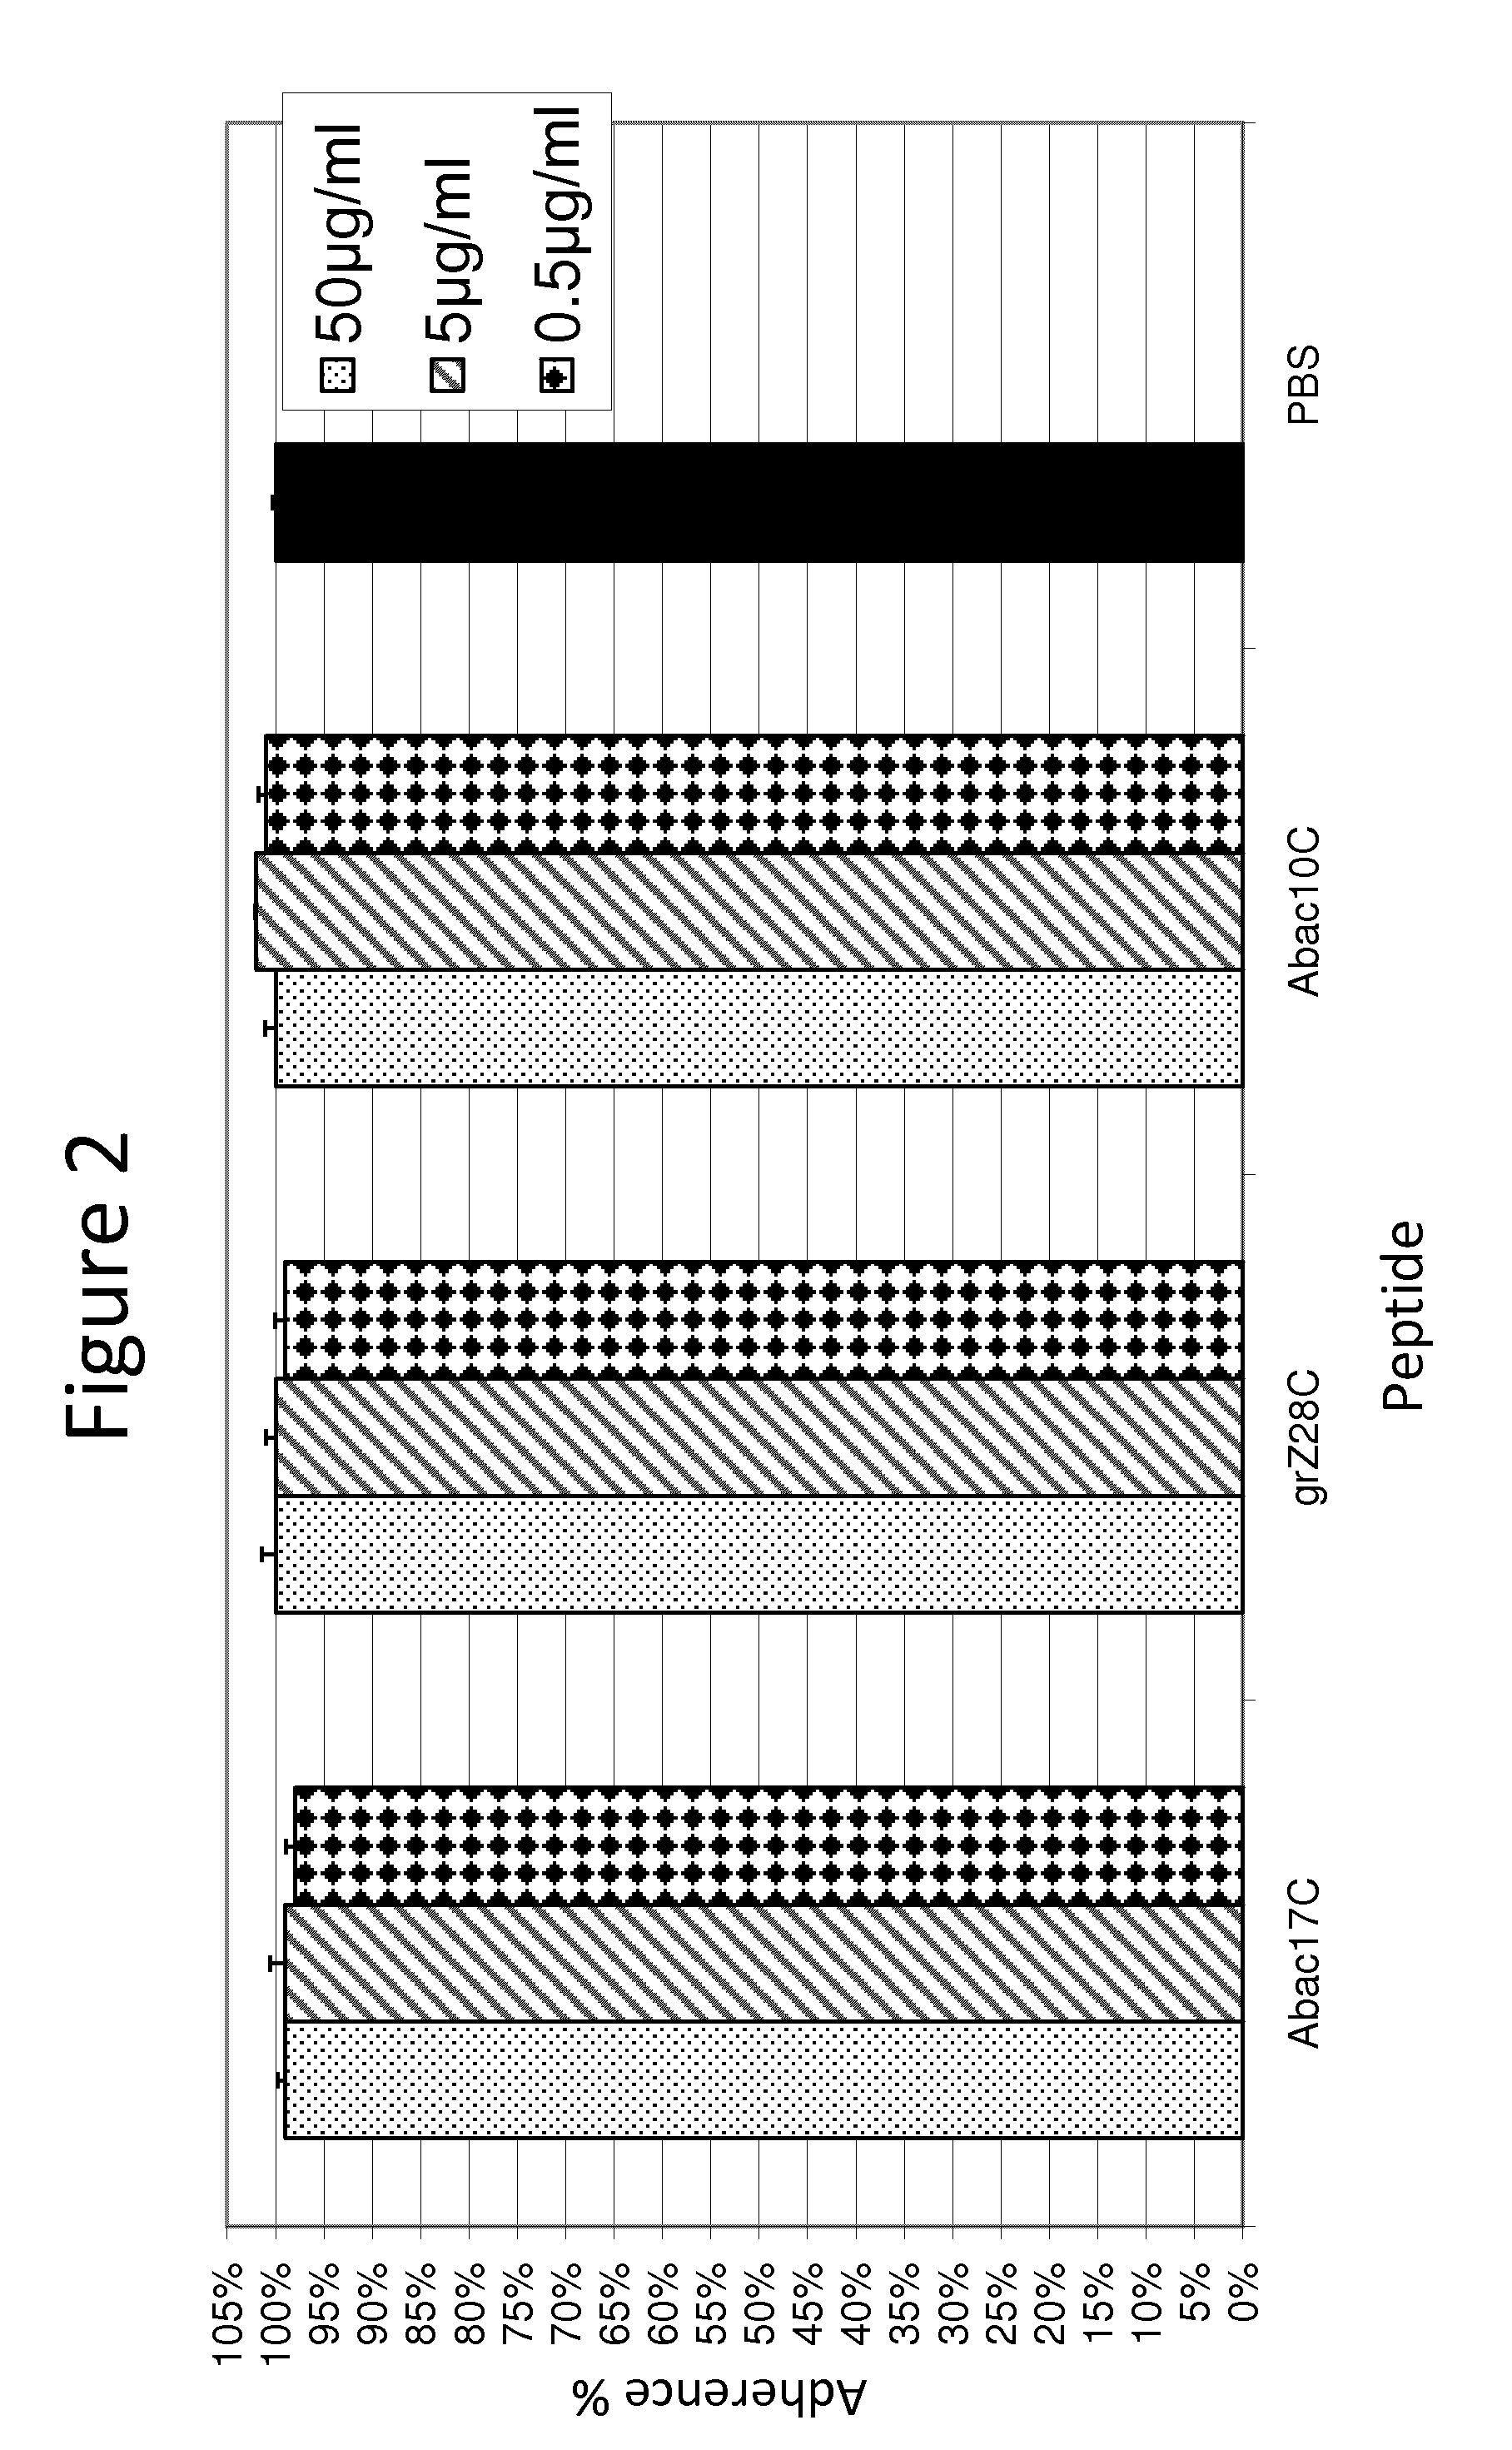 Peptides and compositions for prevention of cell adhesion and methods of using same